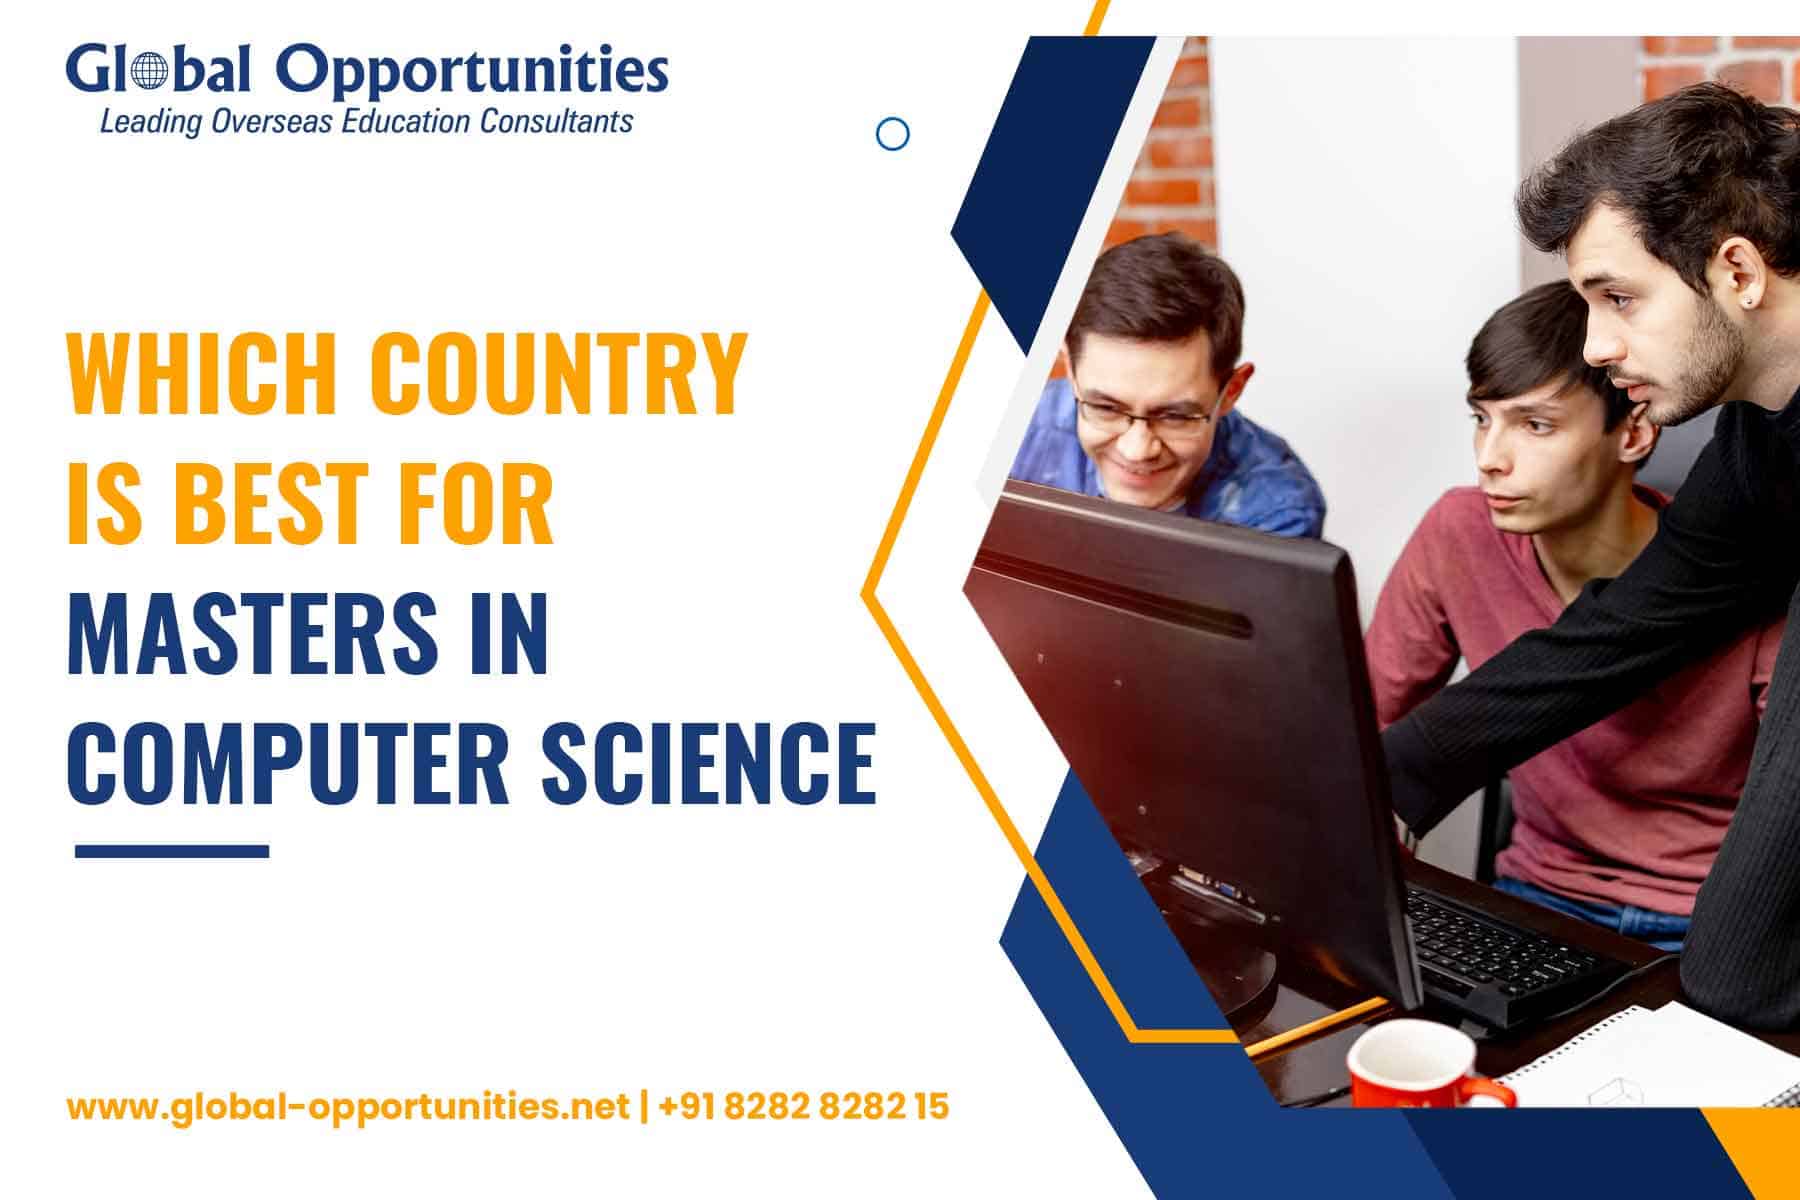 Which country is best for masters in Computer Science?